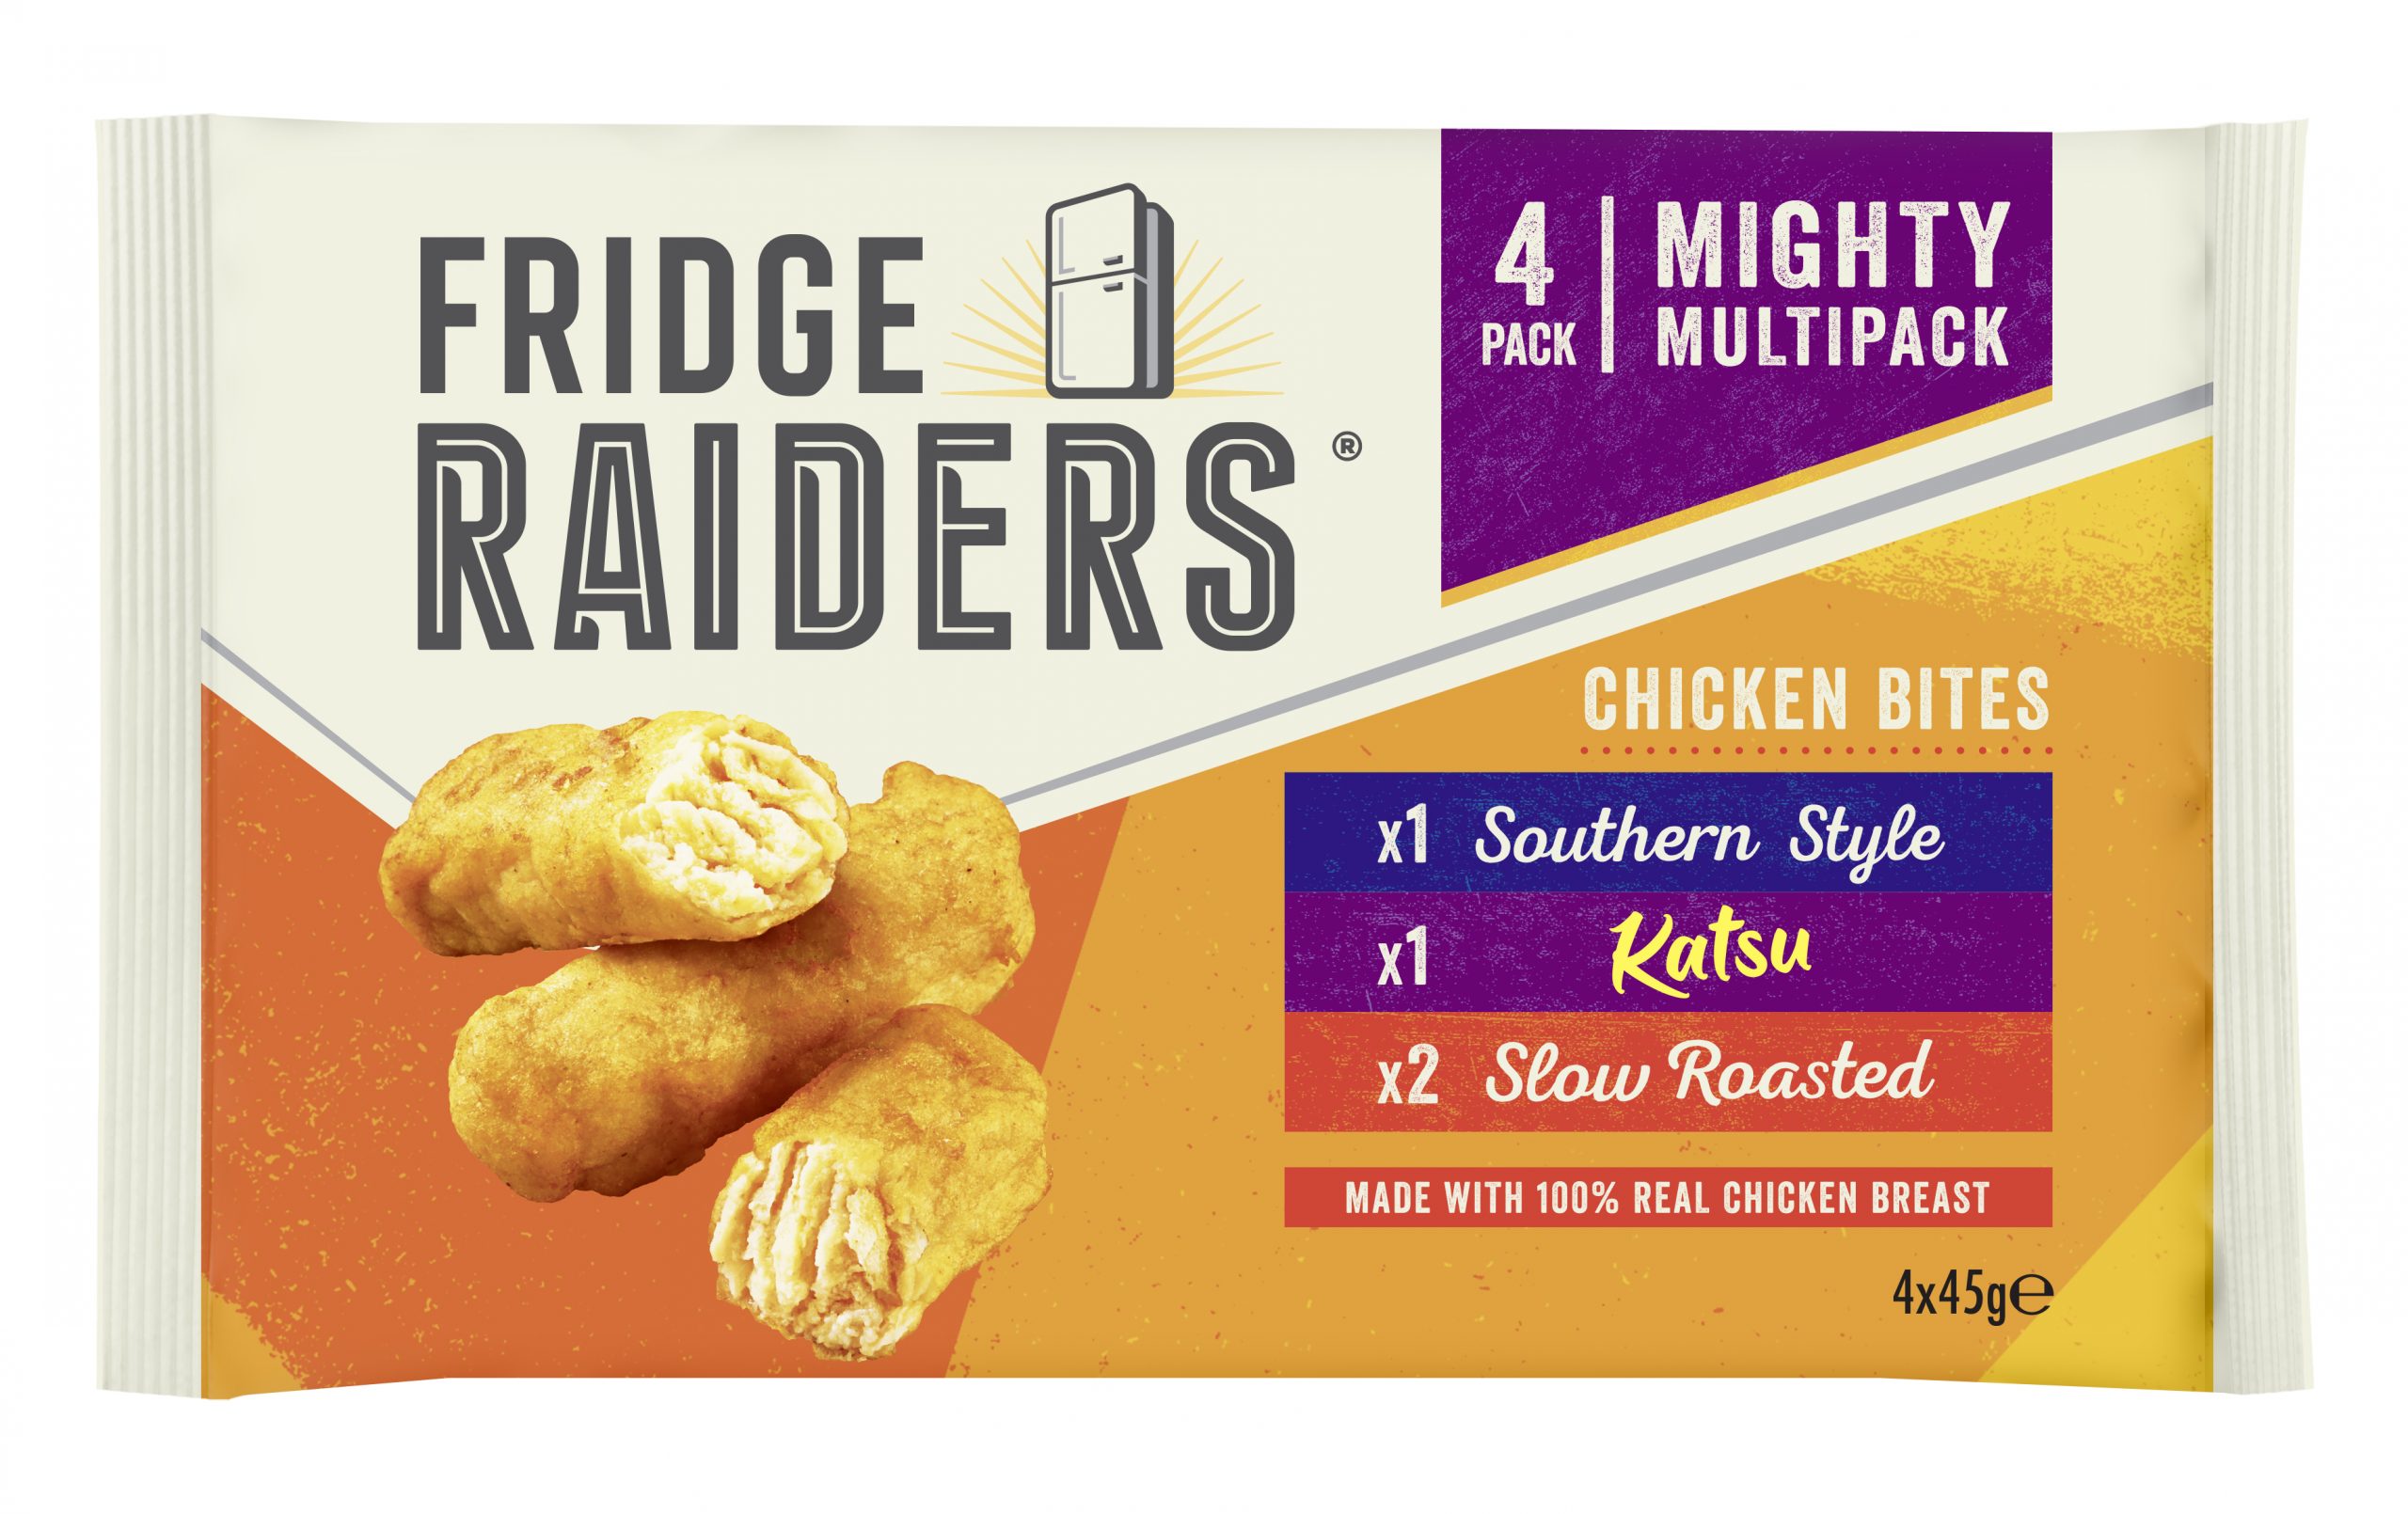 Fridge Raiders announces three new snacking products